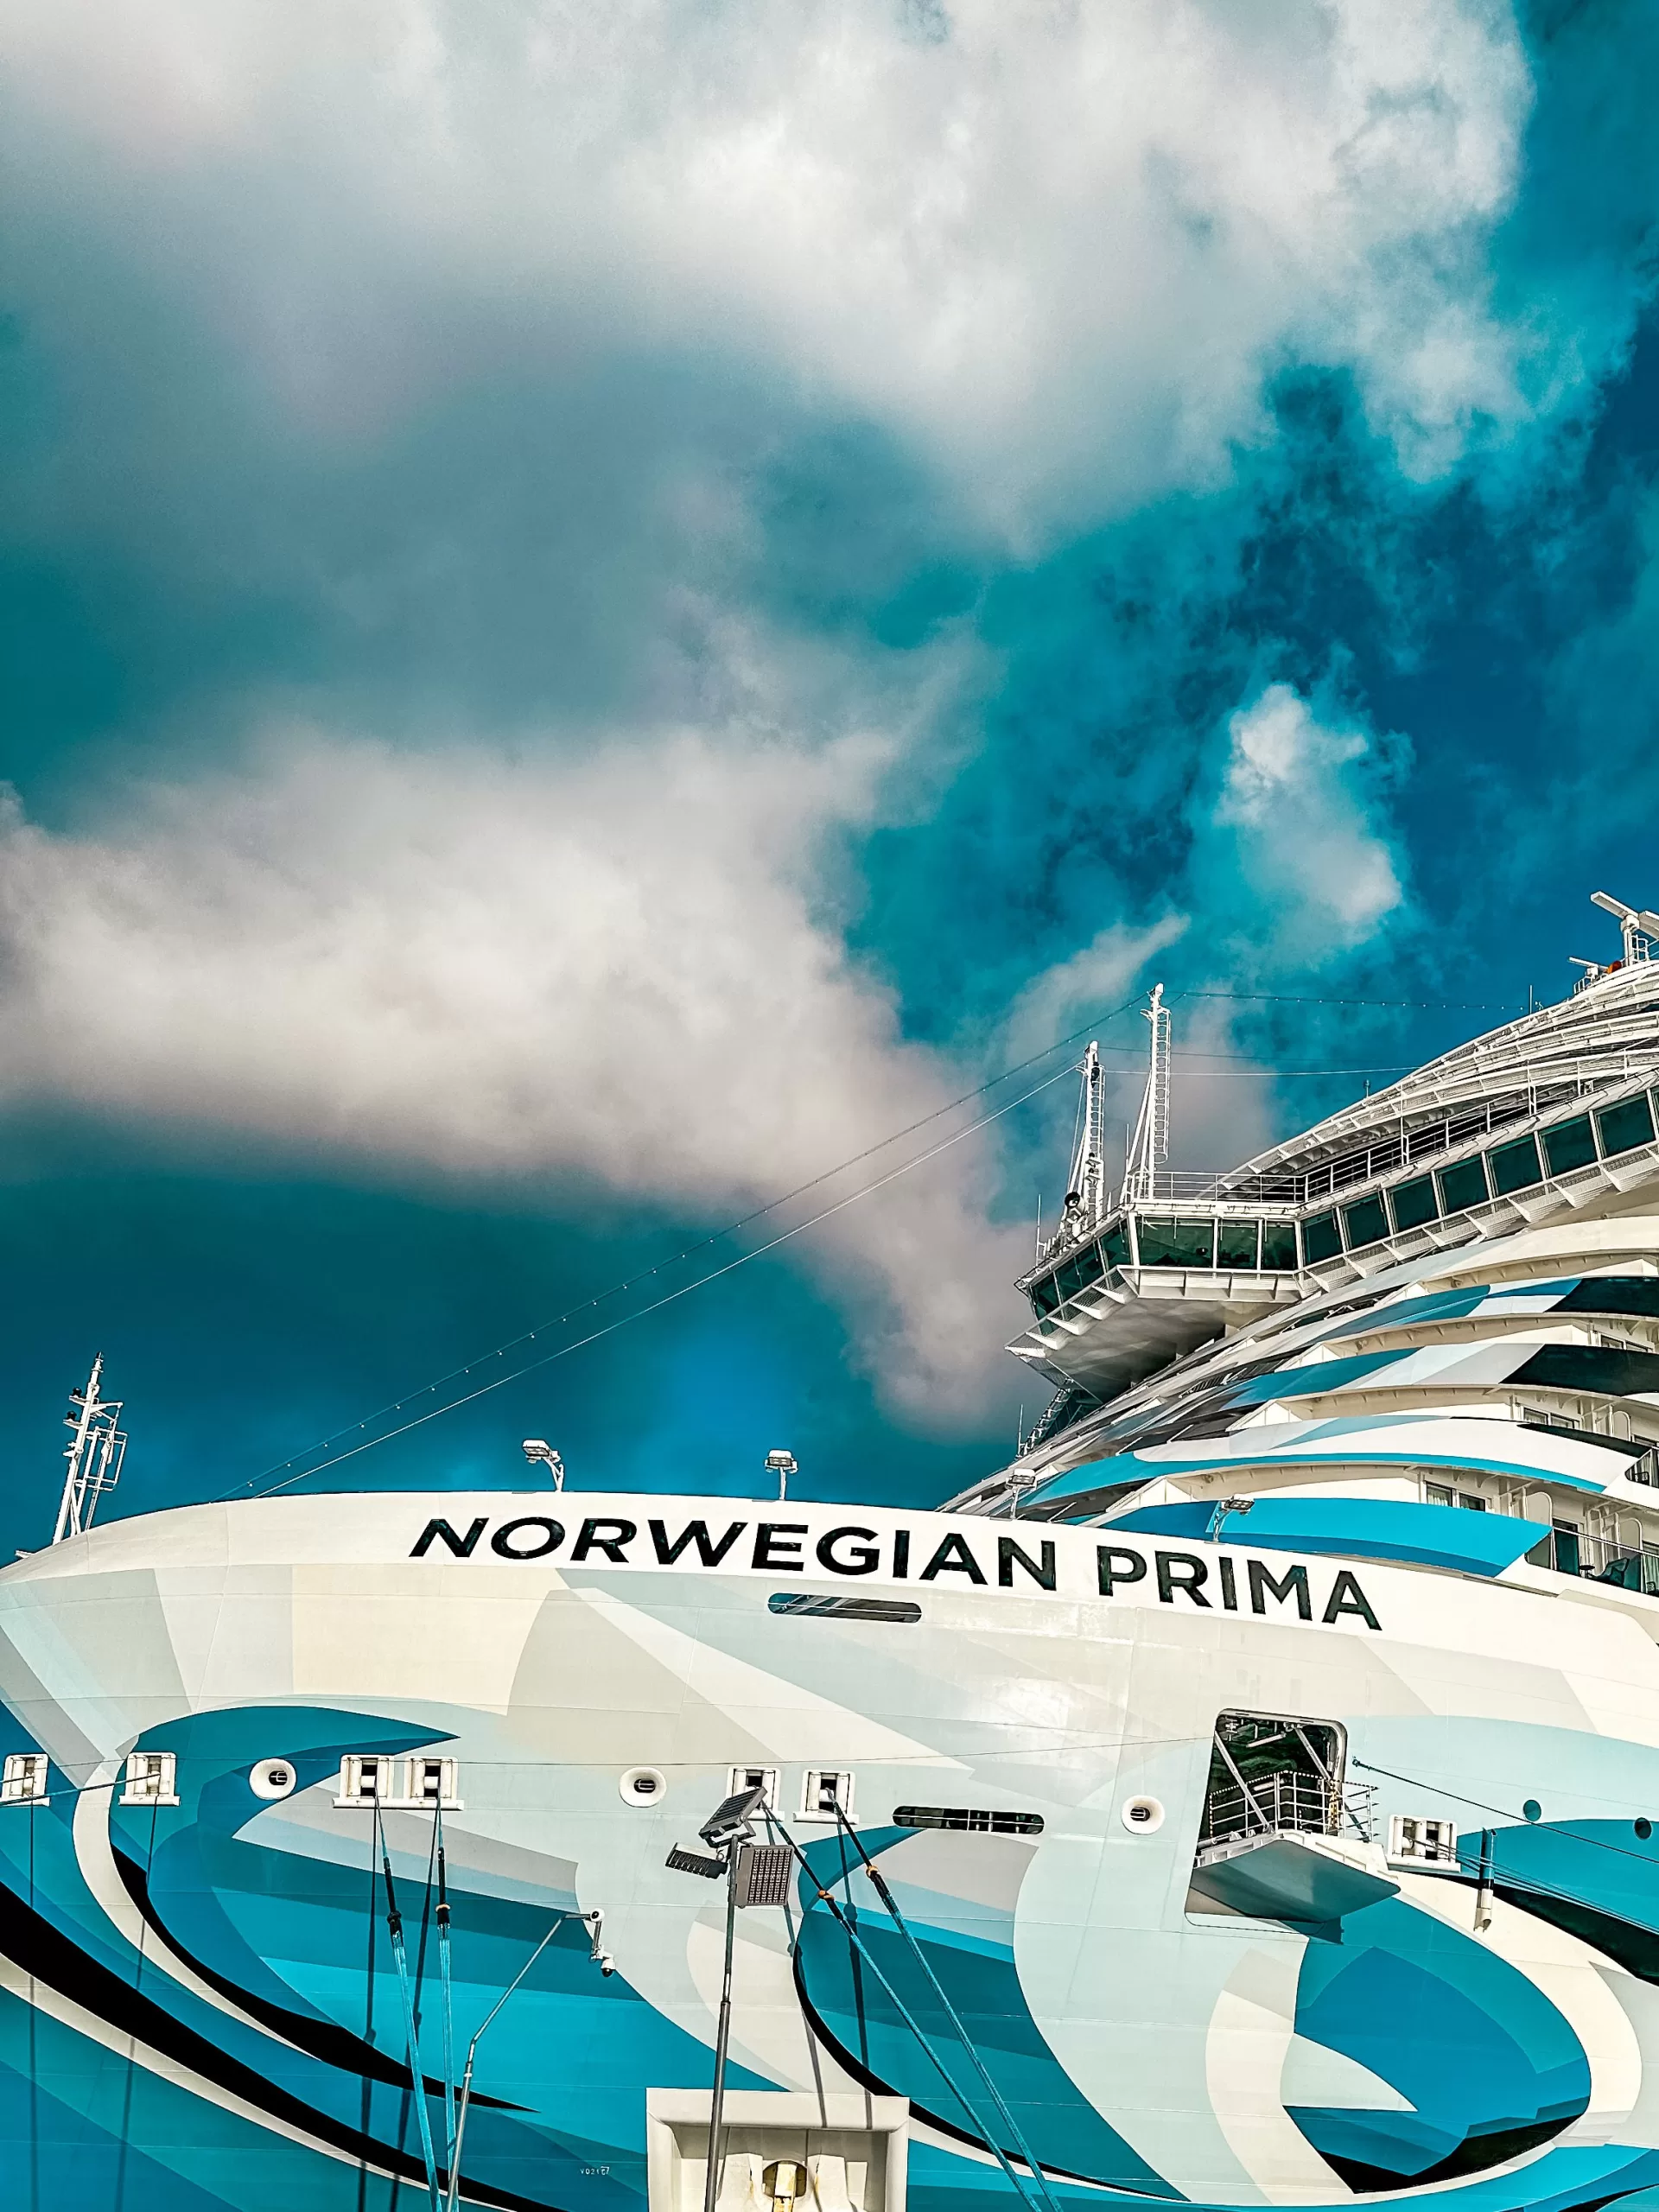 Five Awesome Things About Sailing on Norwegian Prima